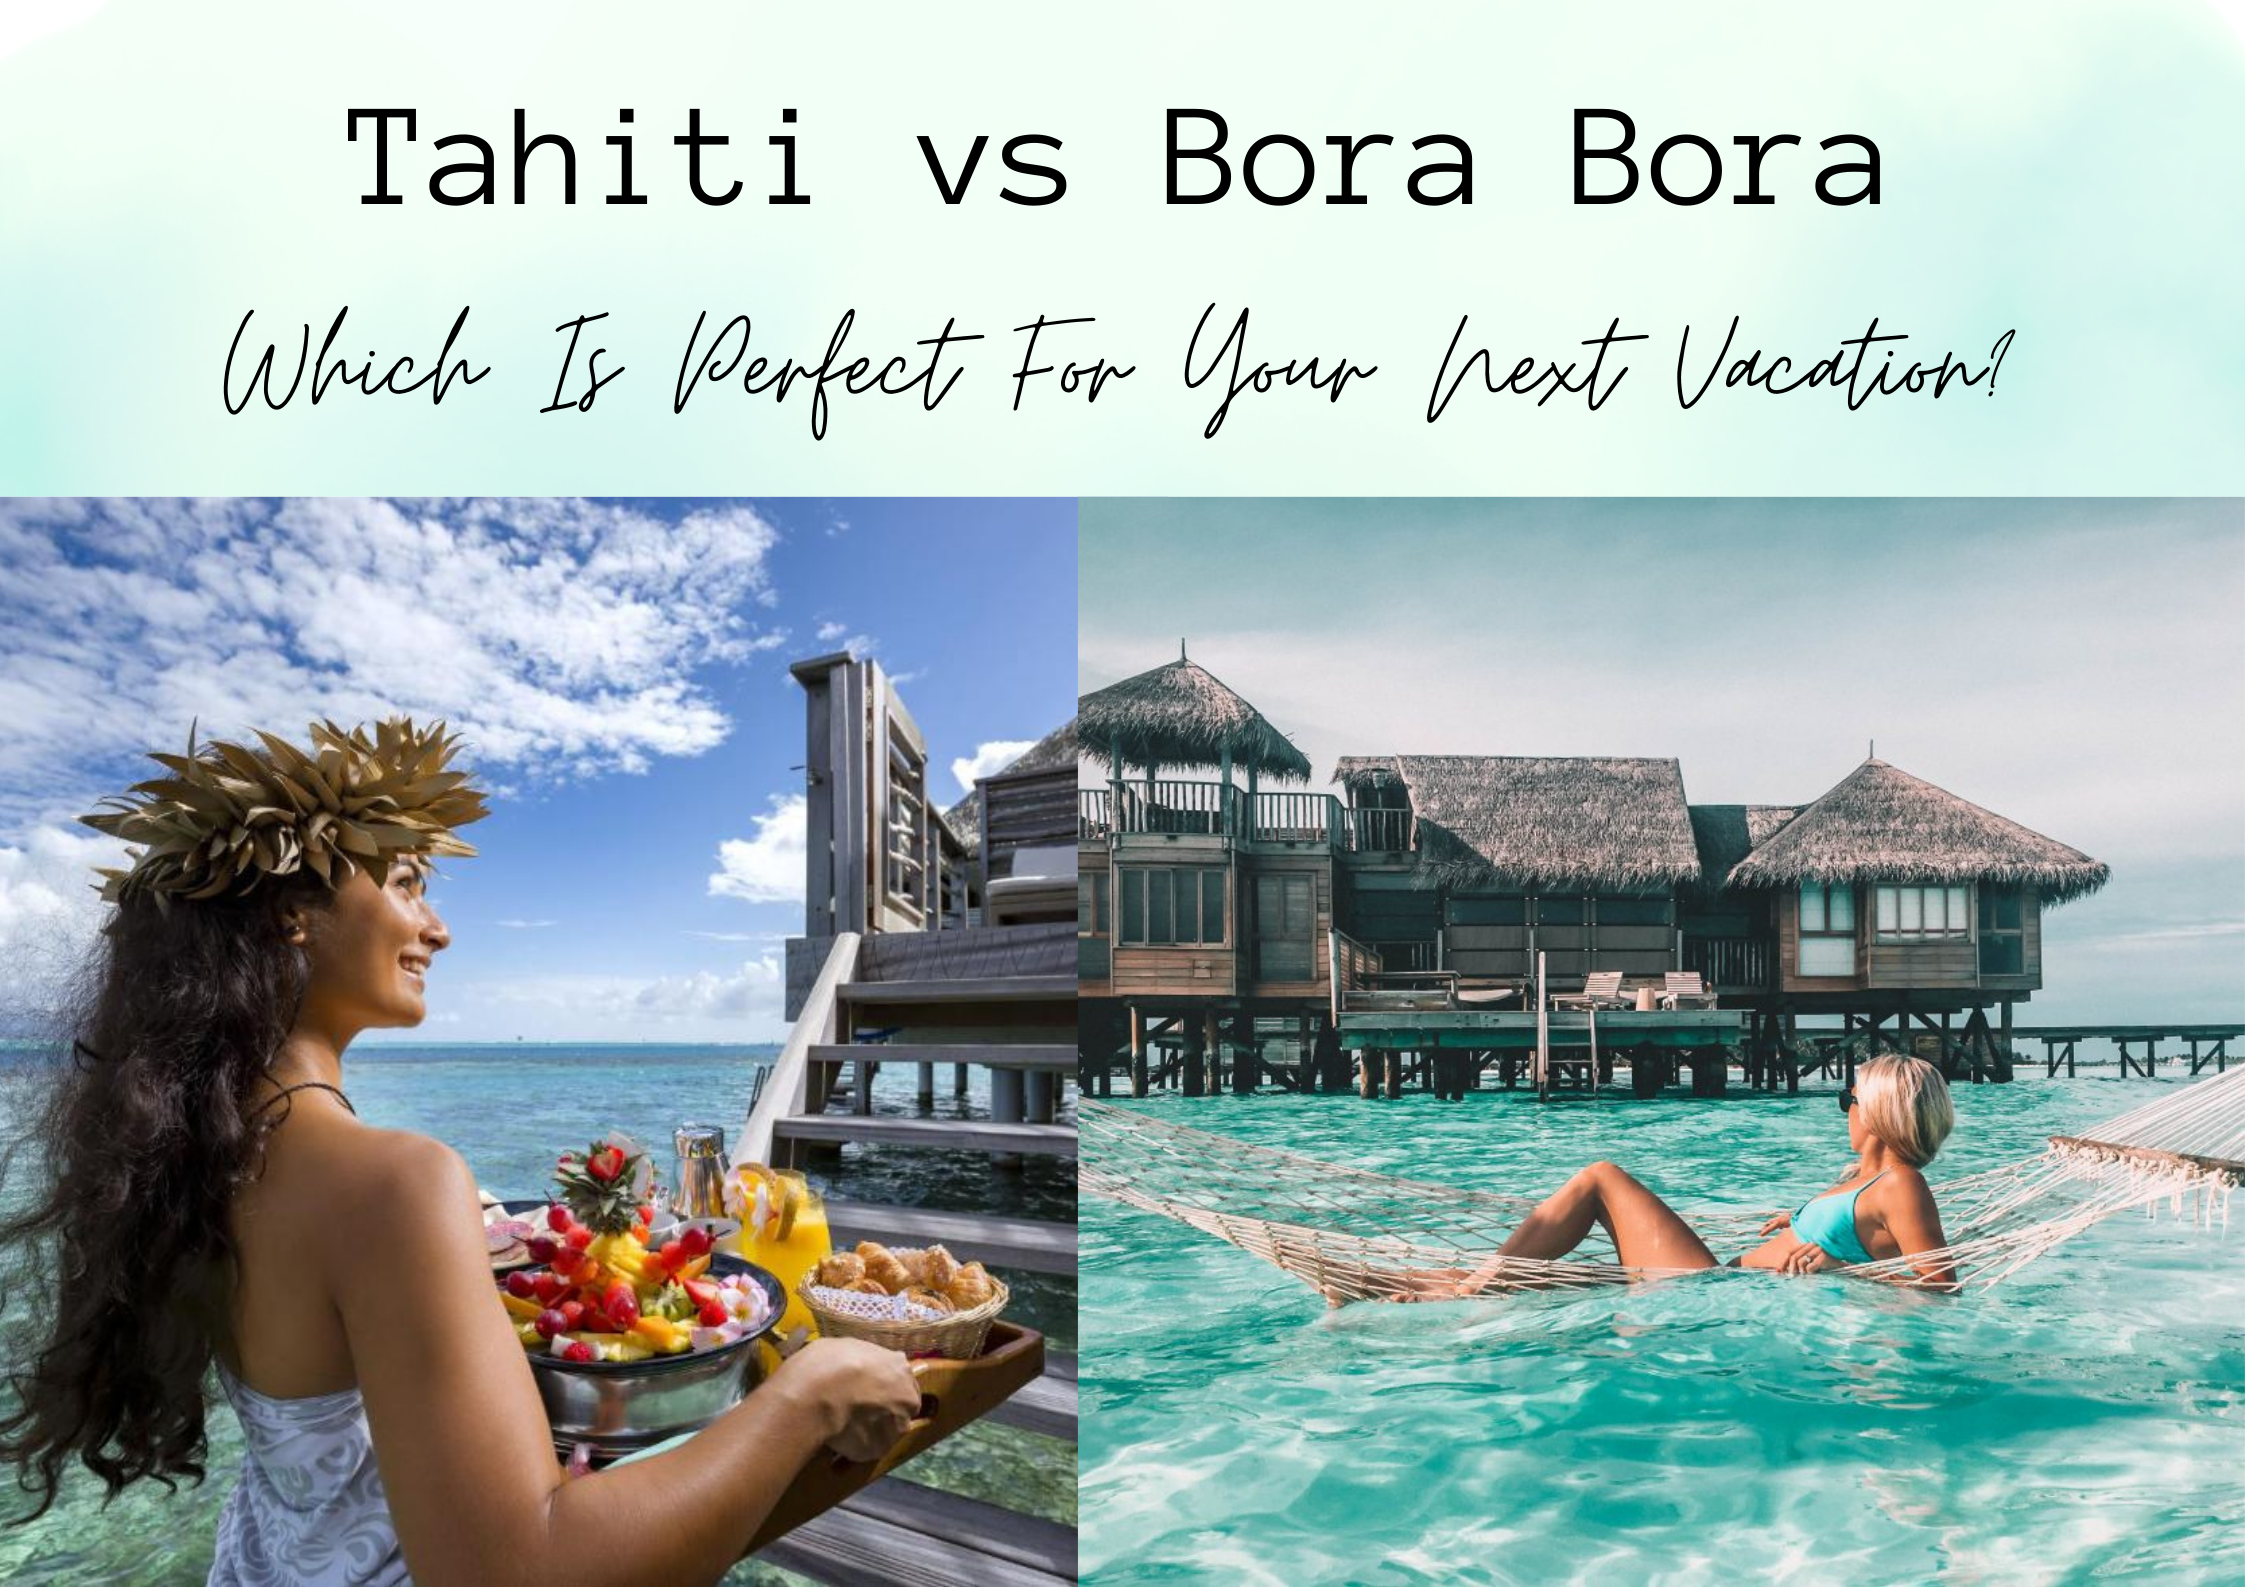 Tahiti vs Bora Bora: Which Is For Your Next Vacation?